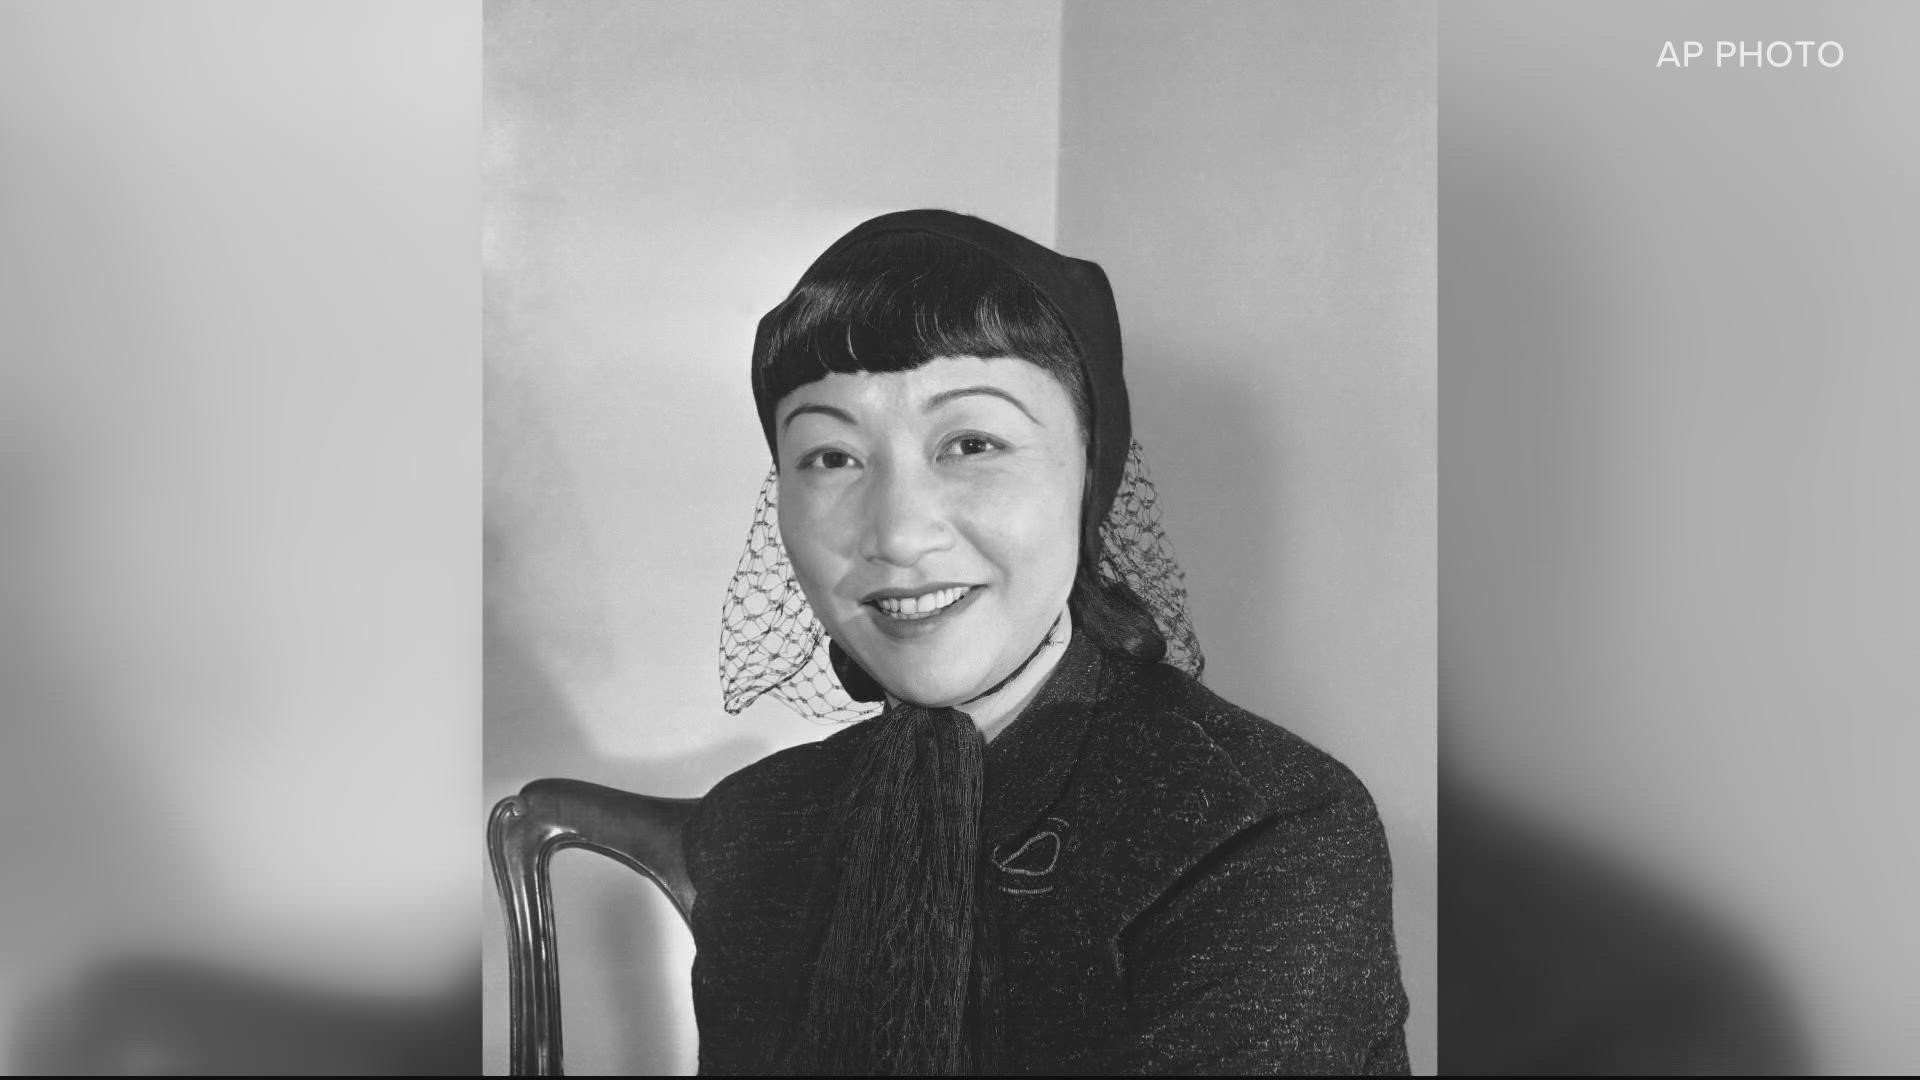 Anna May Wong to appear on United States' quarter as first Asian-American in history.